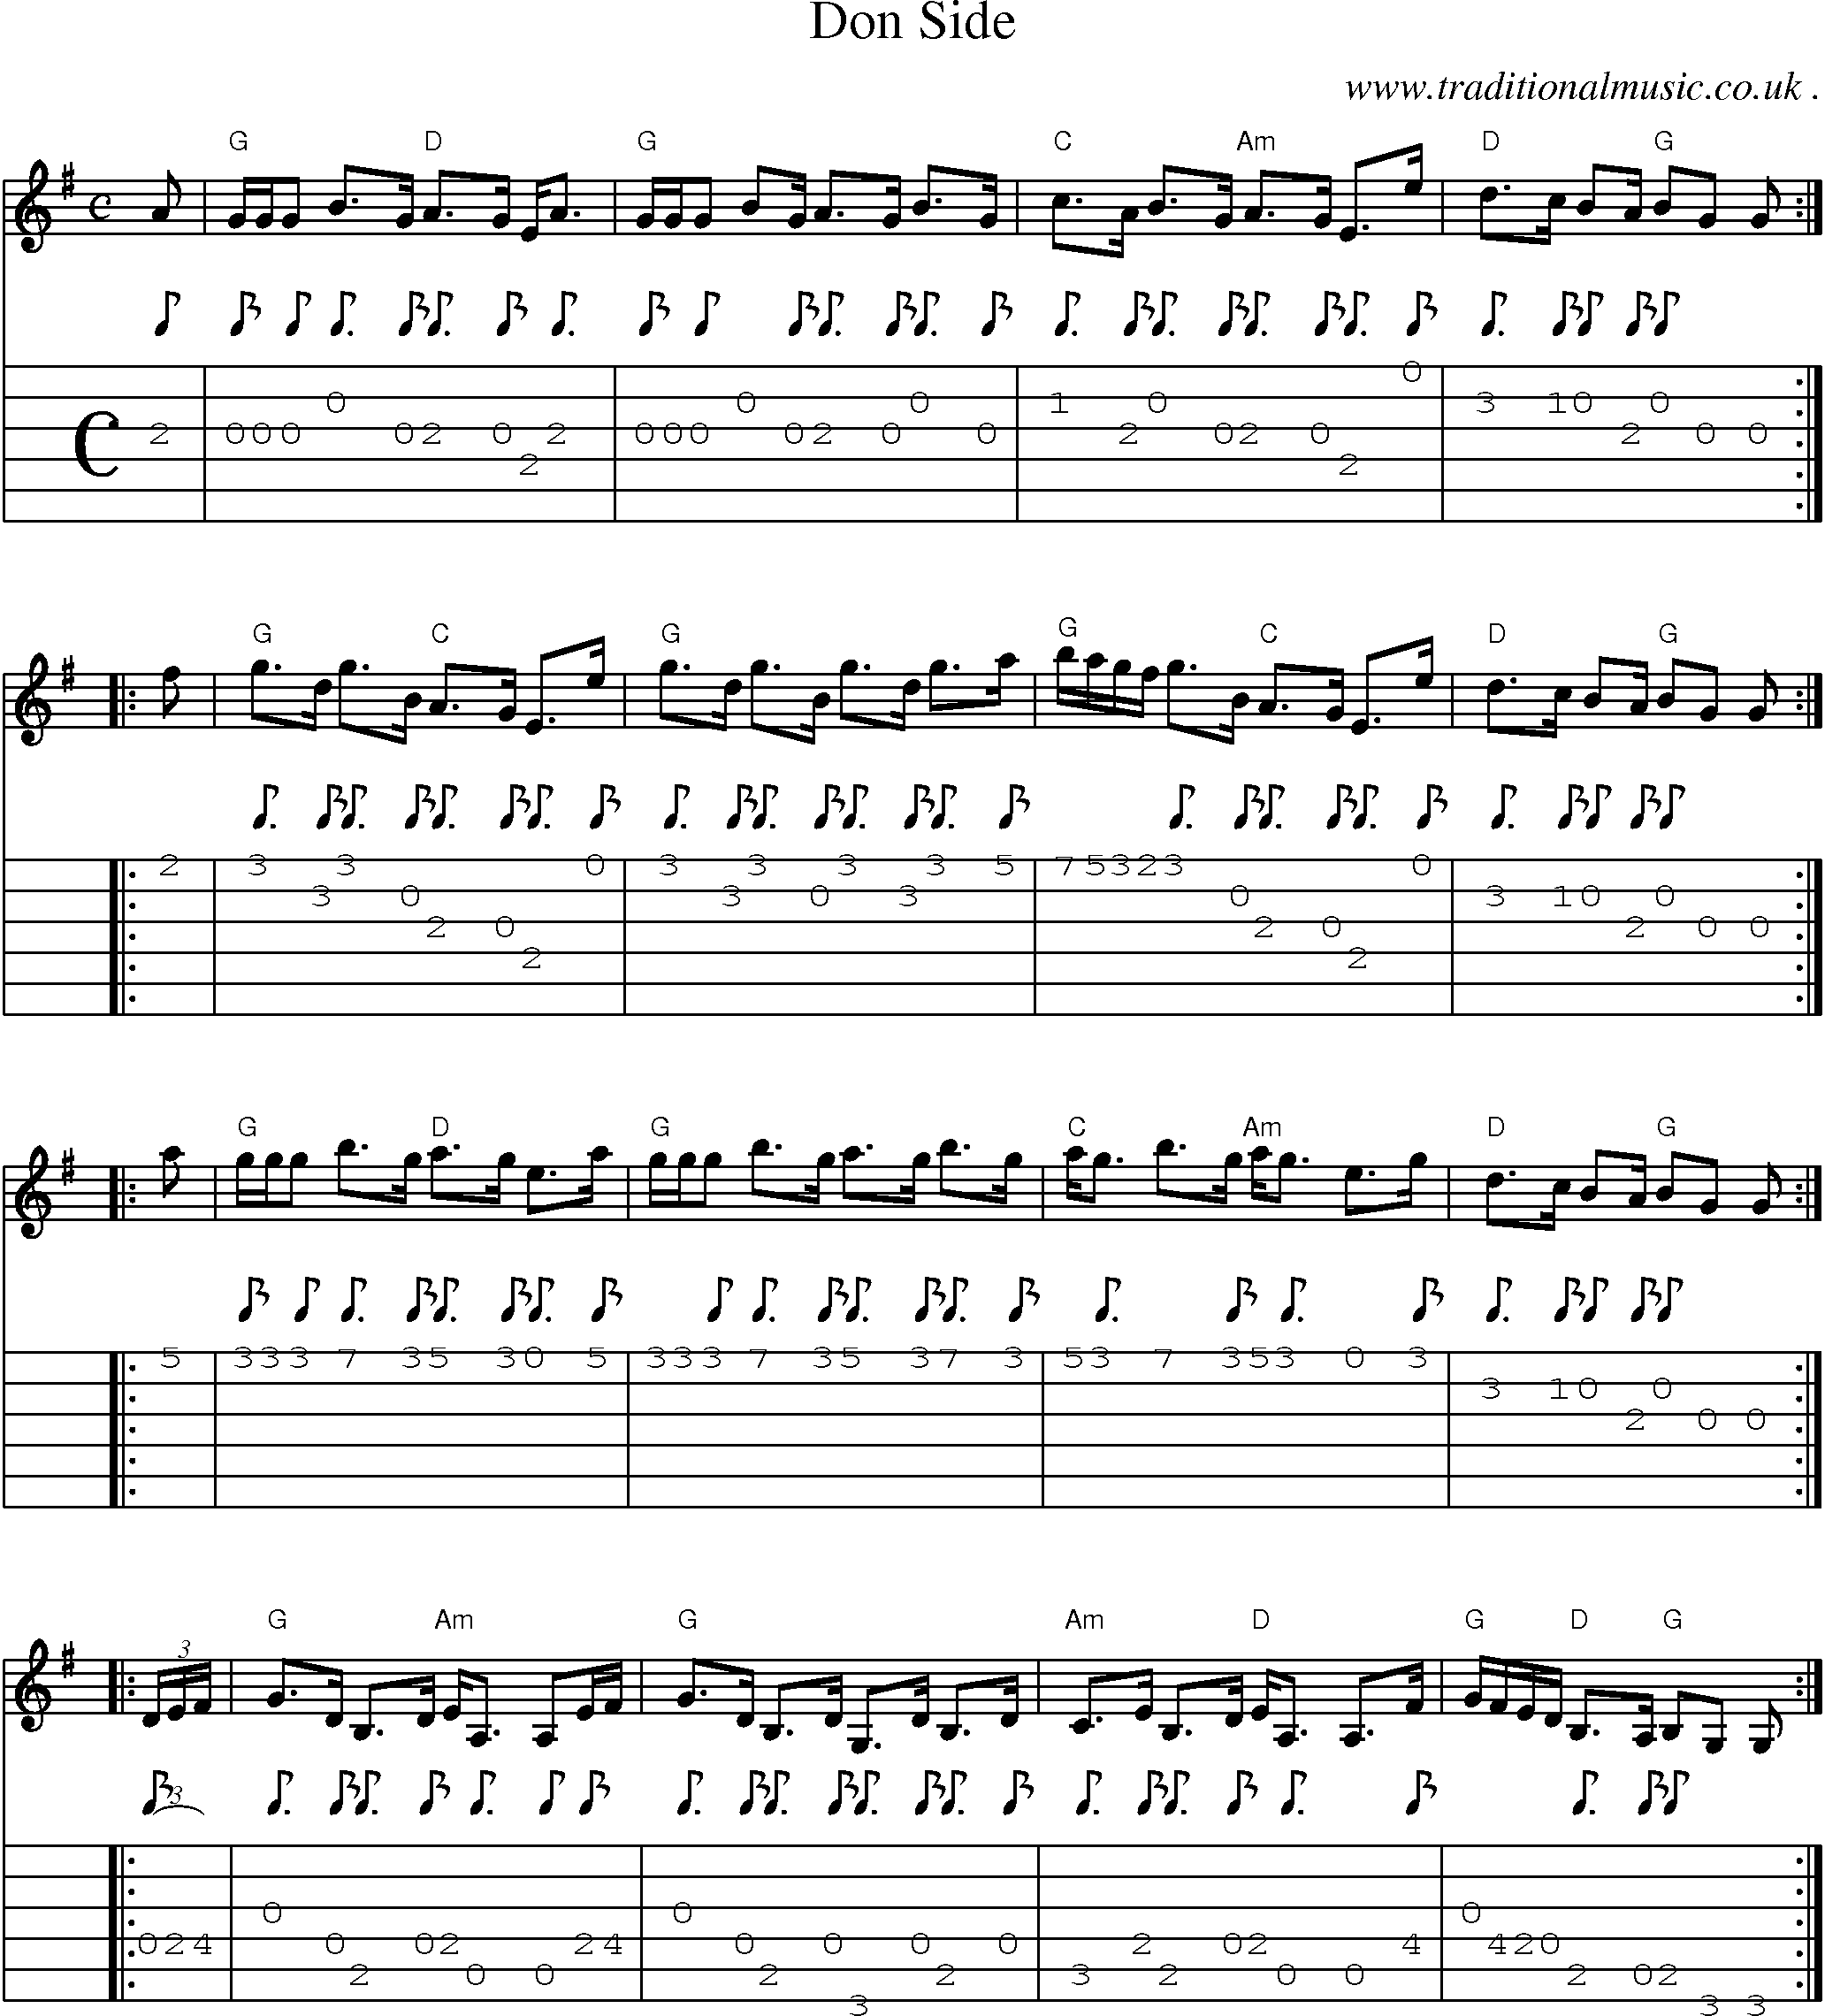 Sheet-music  score, Chords and Guitar Tabs for Don Side